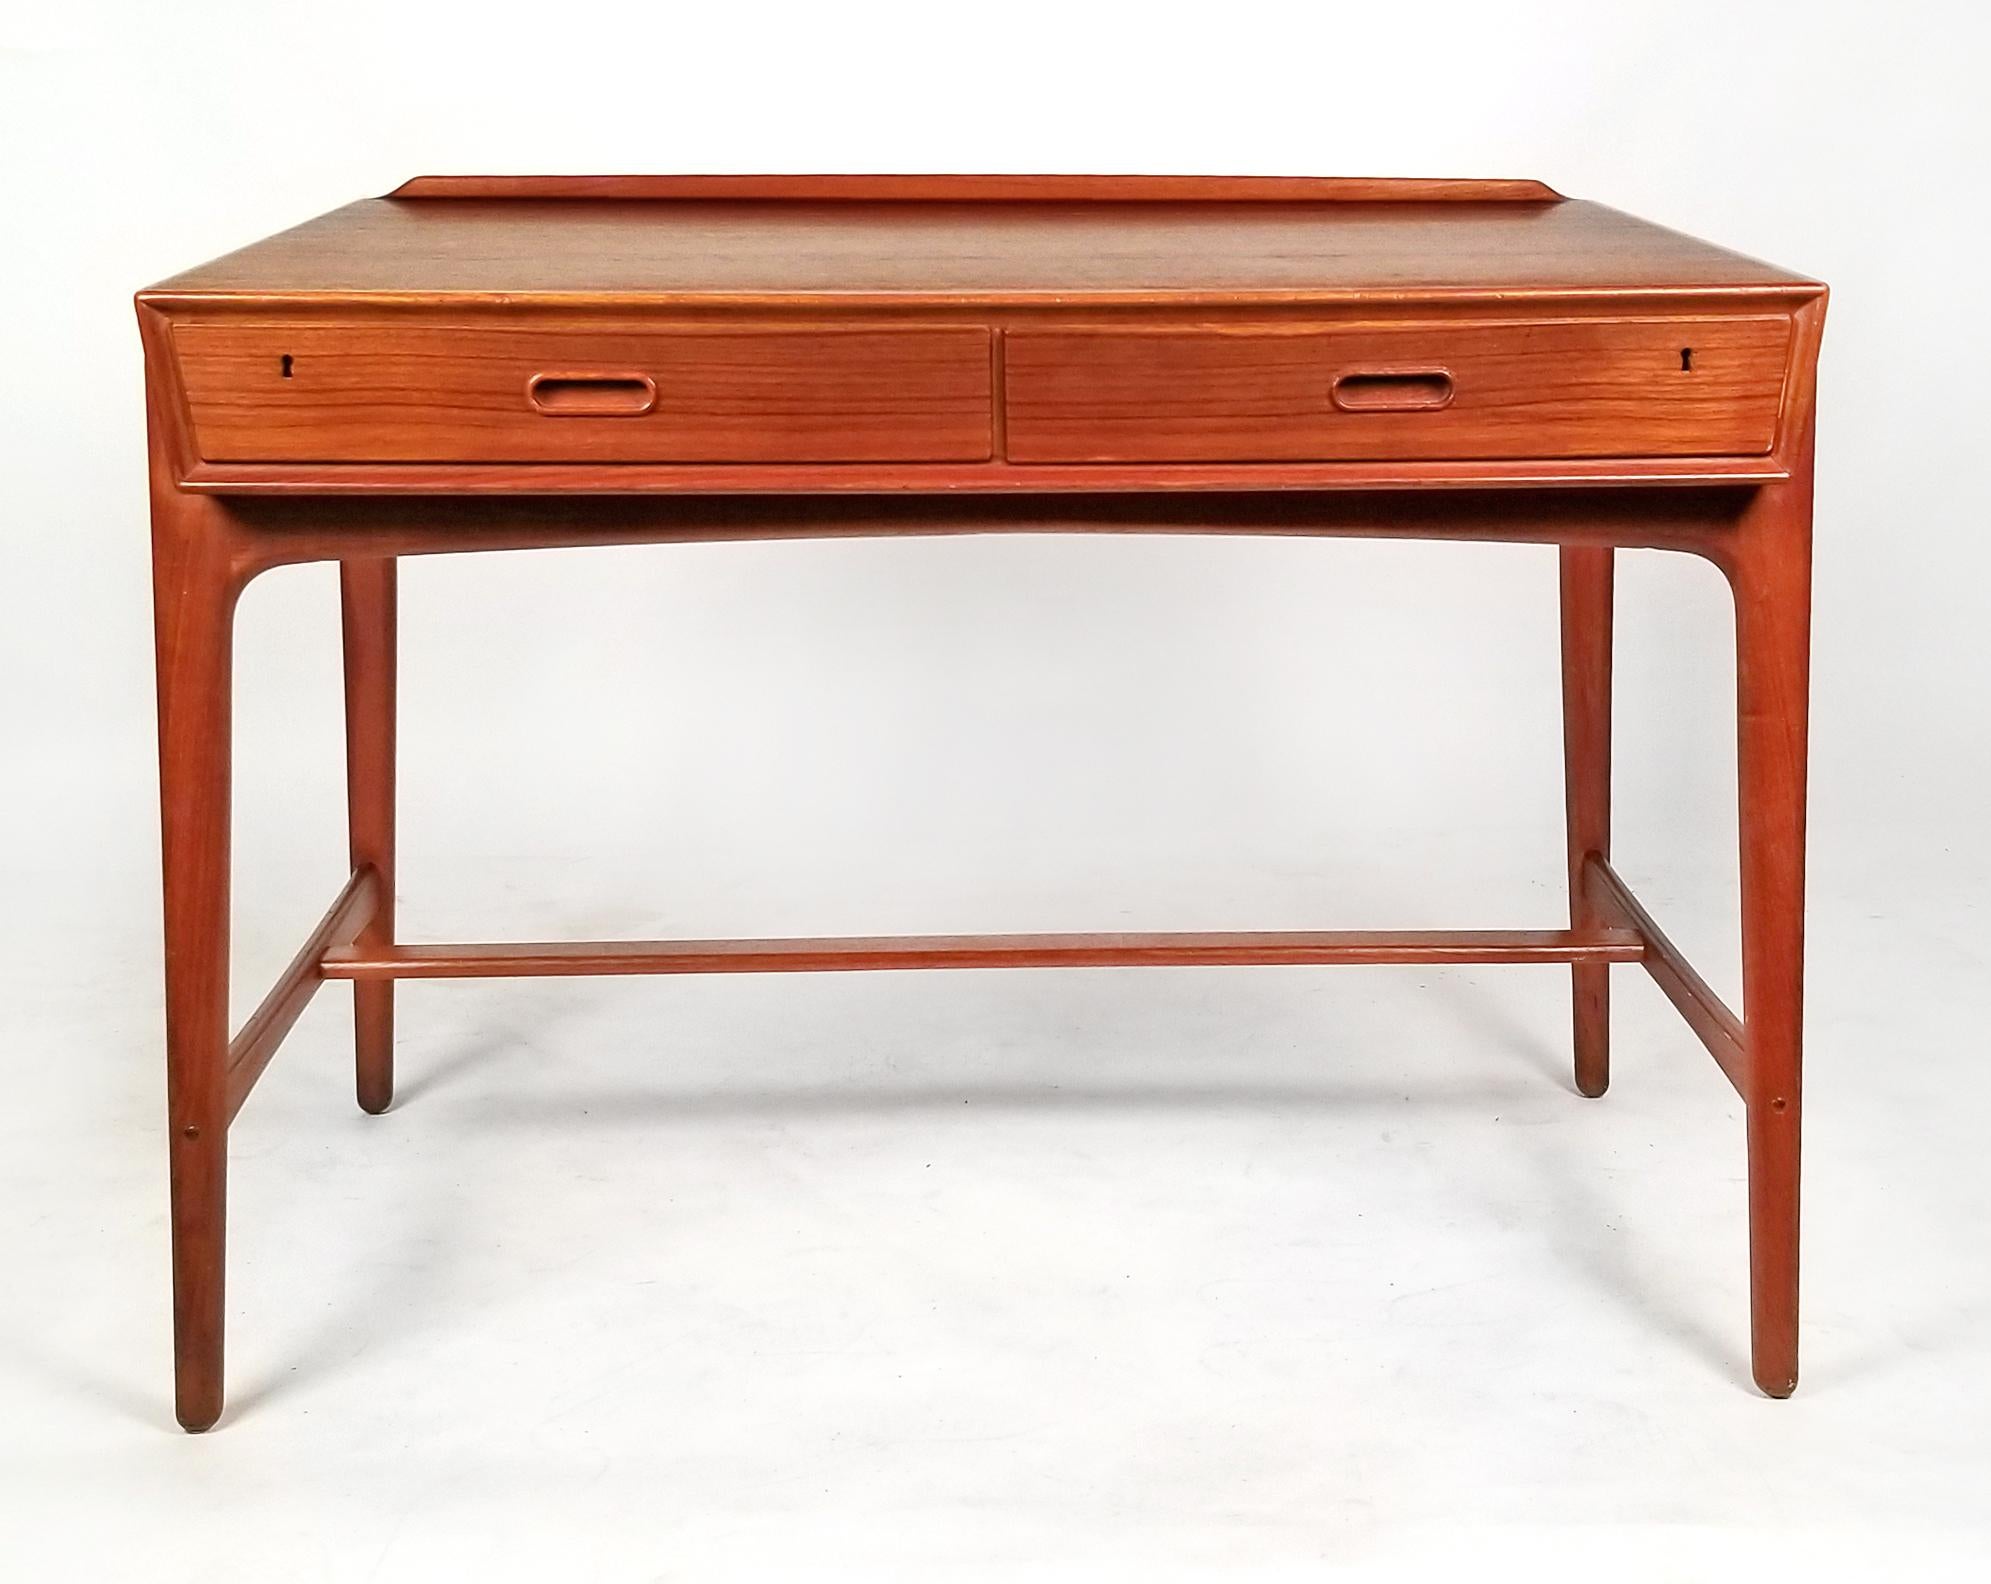 This beautiful little teak desk was designed by Svend Age Madsen and was crafted by the Scandinavian cabinet makers at Sigurd Hansen. The proportions are design details are amazing from the slightly forward sloping writing surface to the tapered